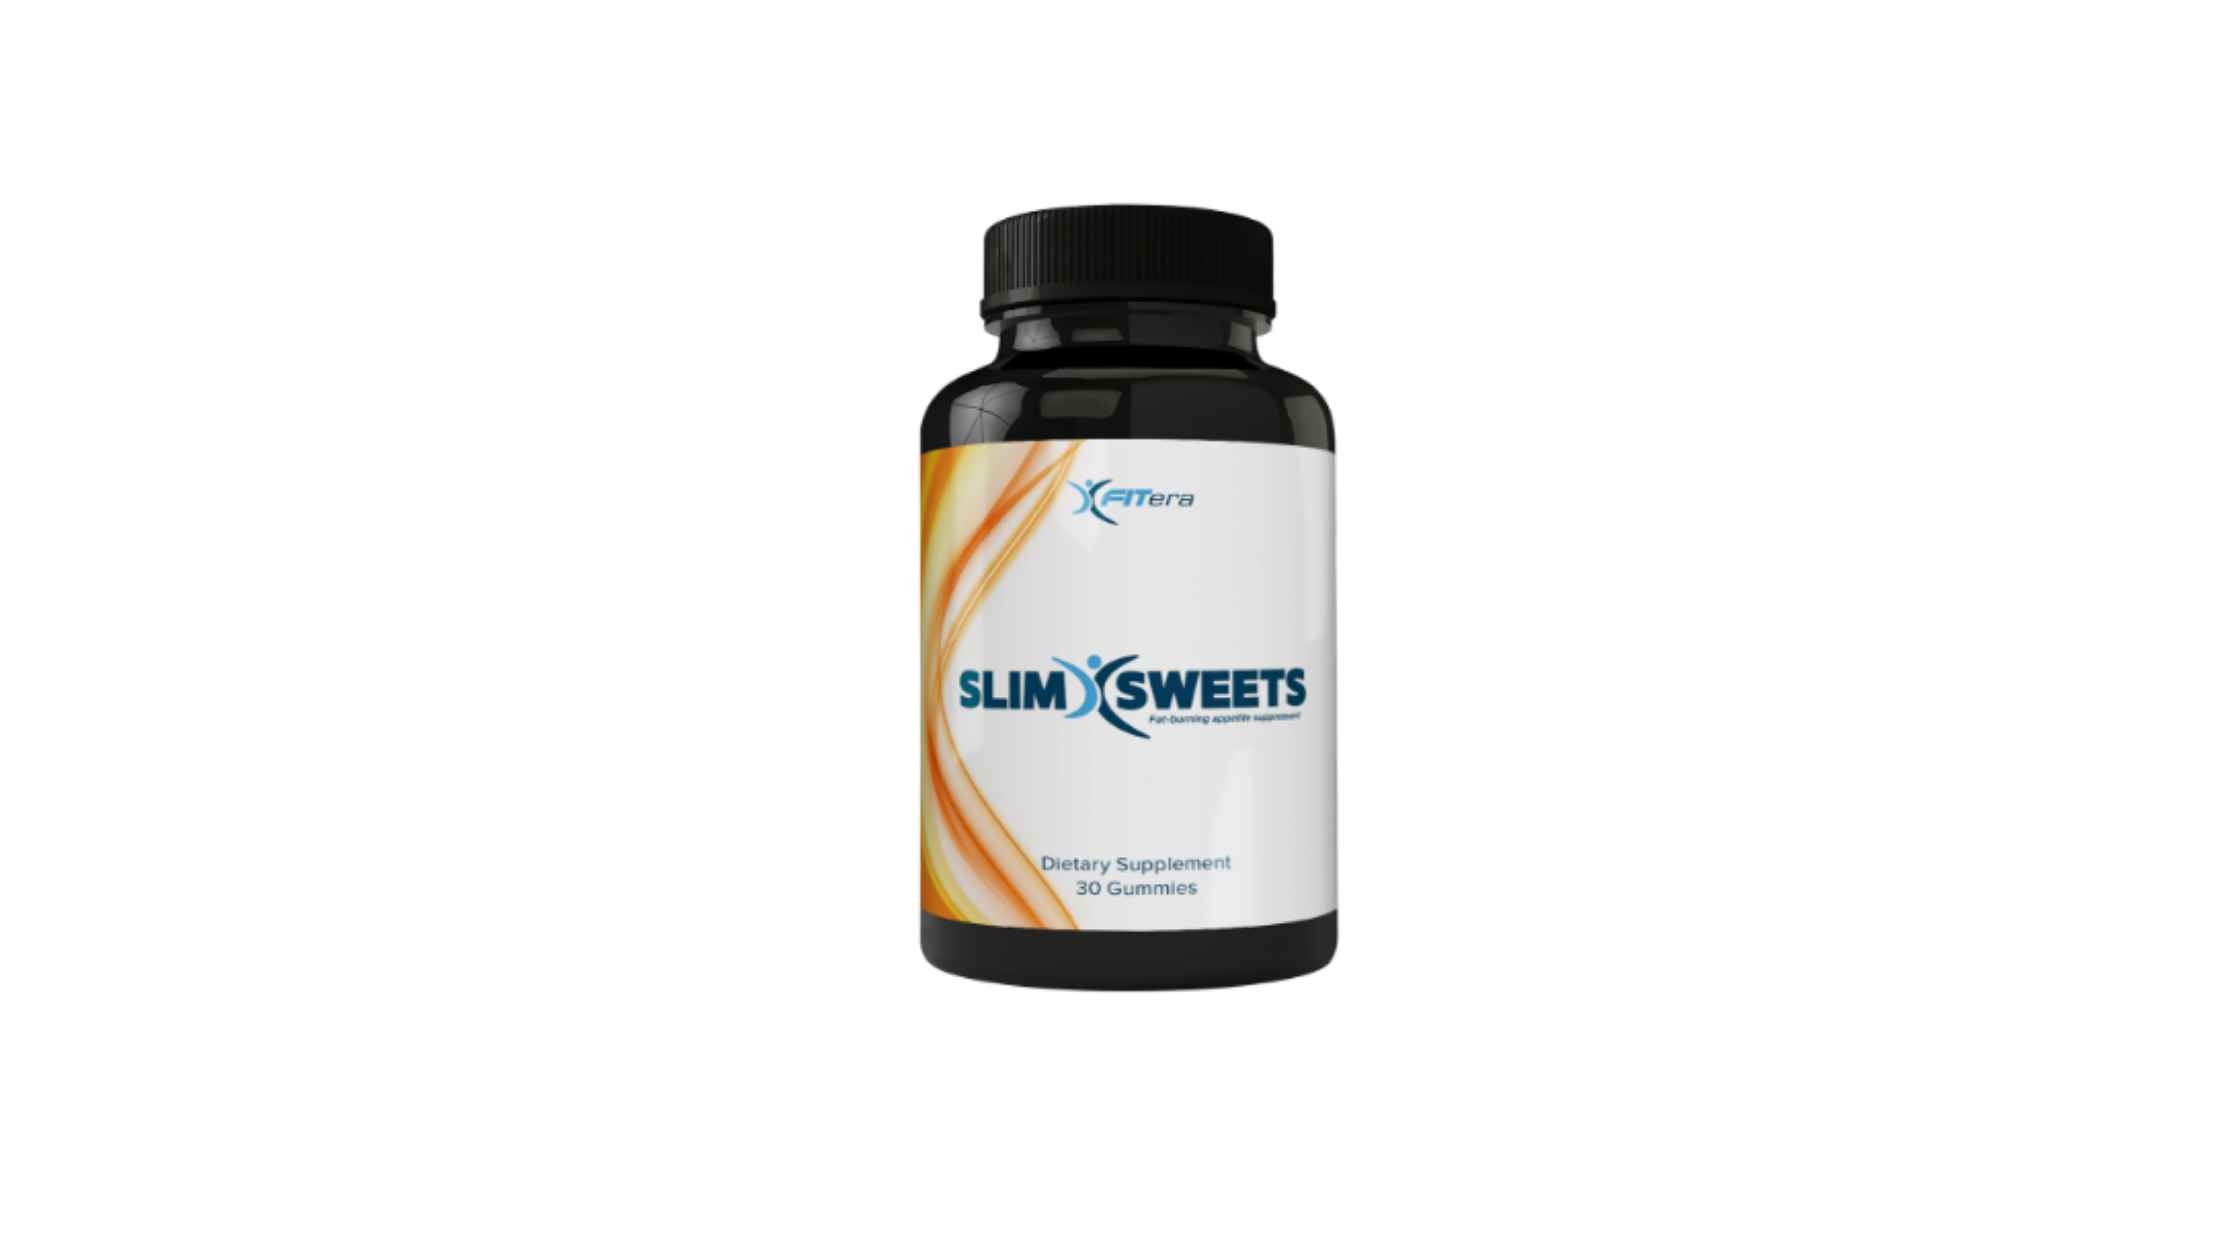 SlimSweets Reviews